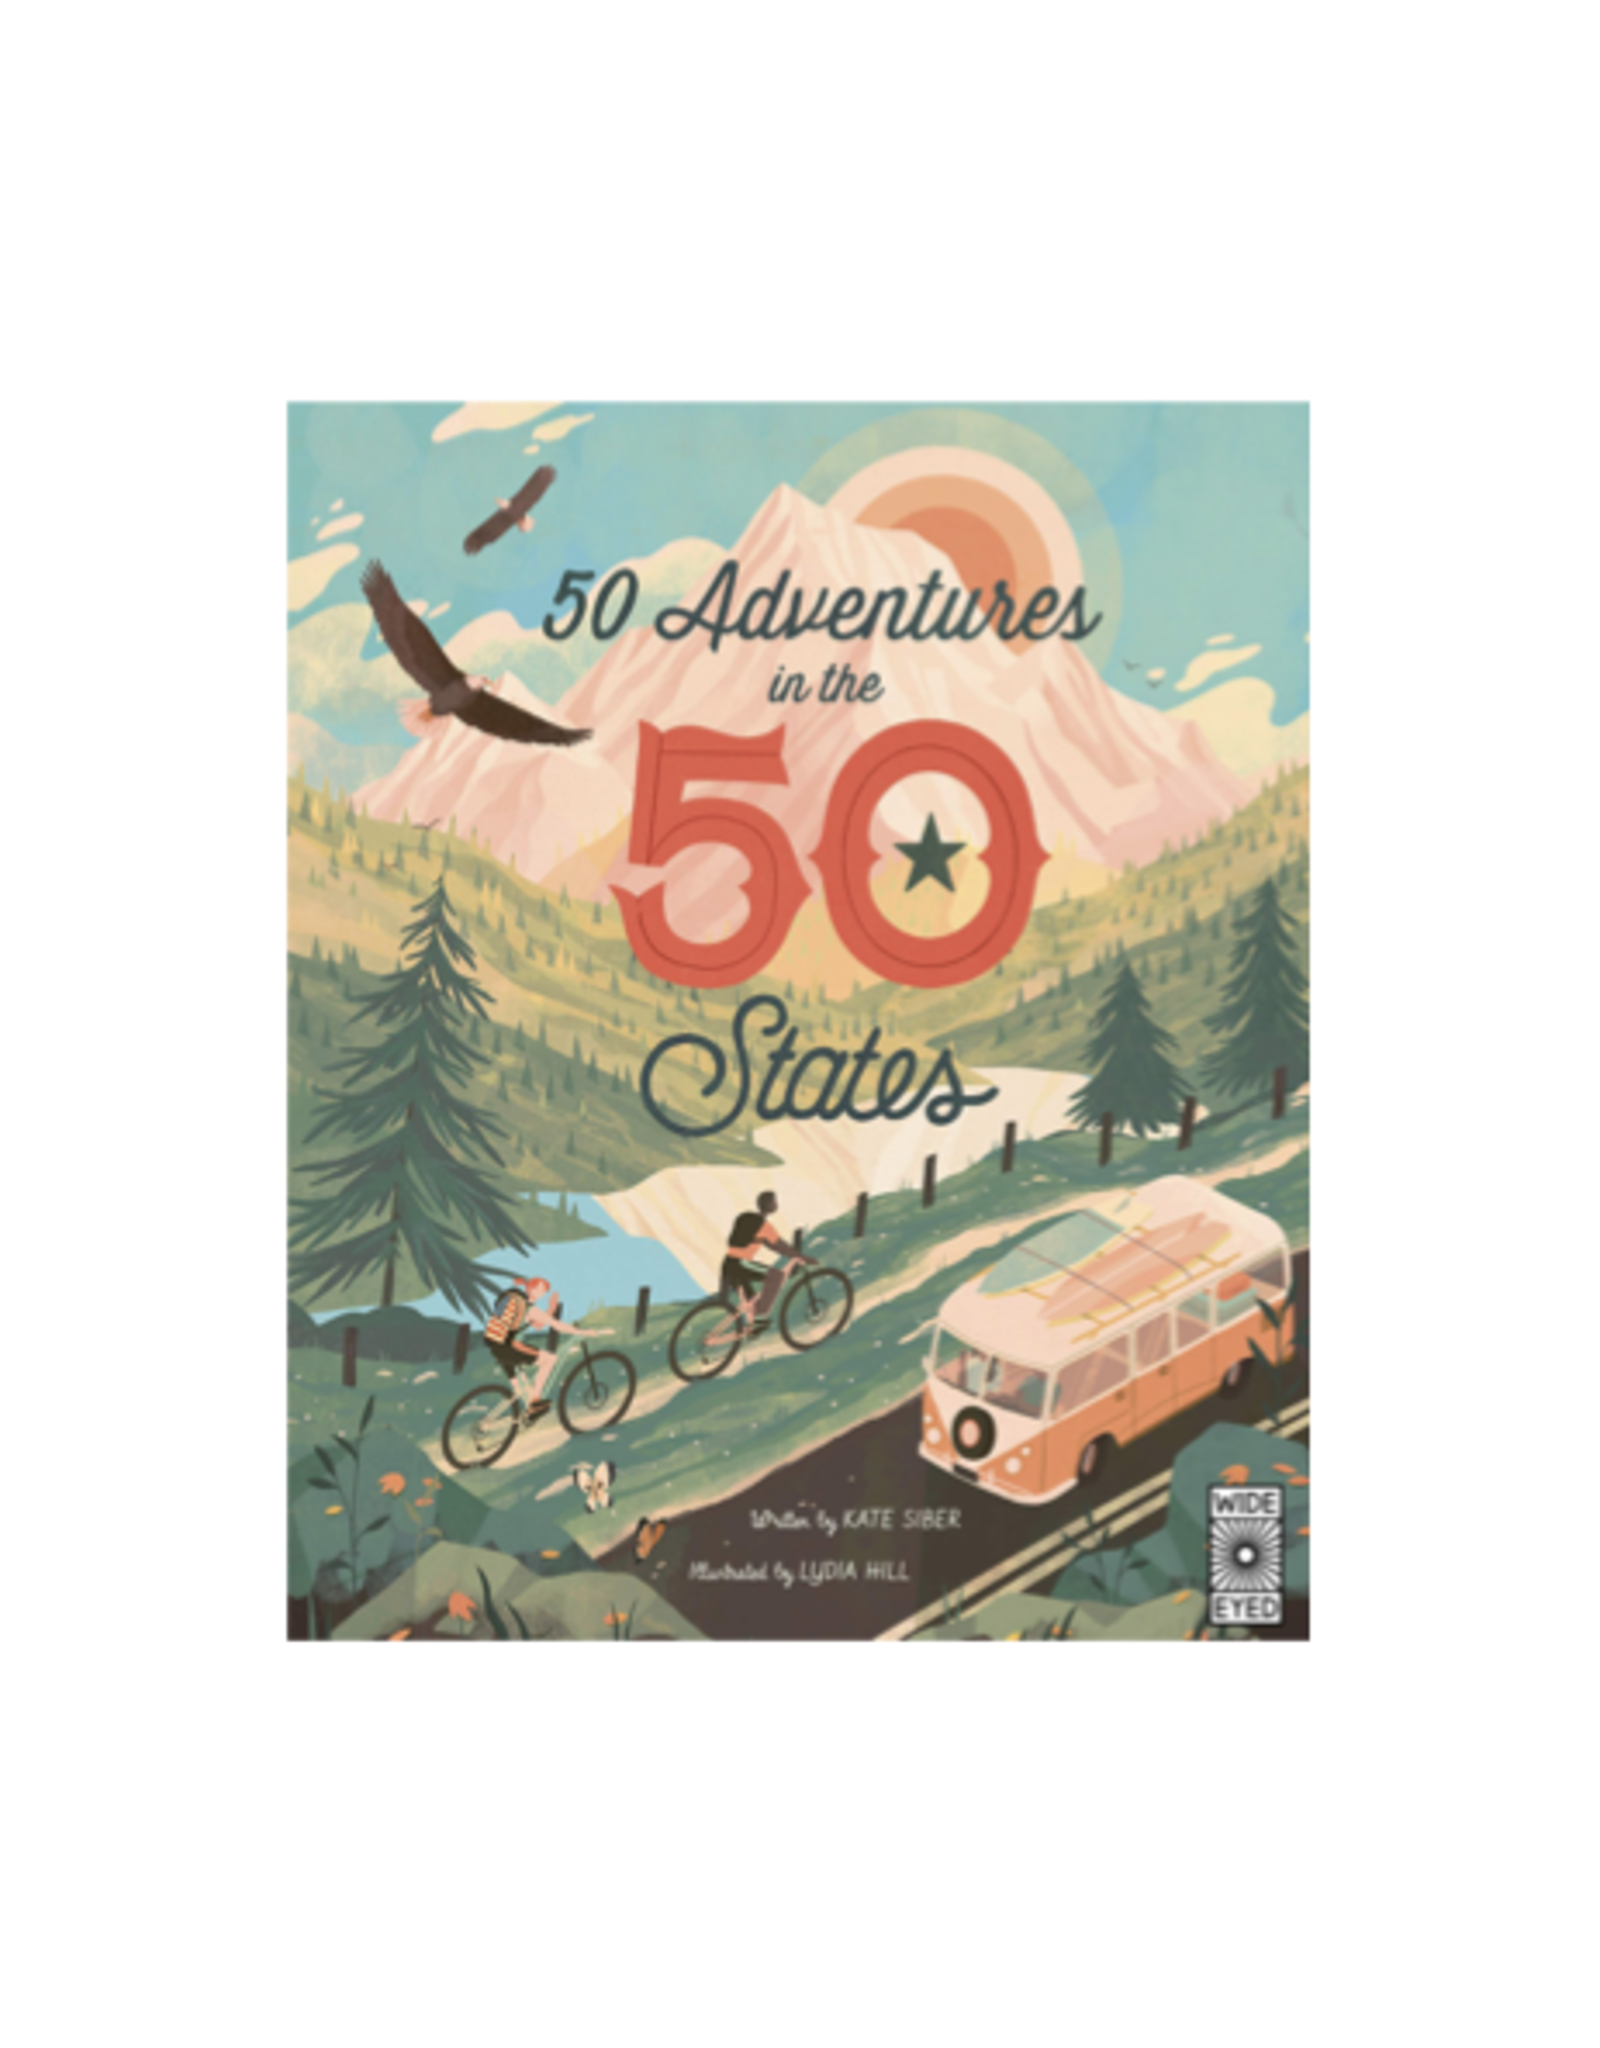 50 Adventures in The 50 States by: Kate Siber